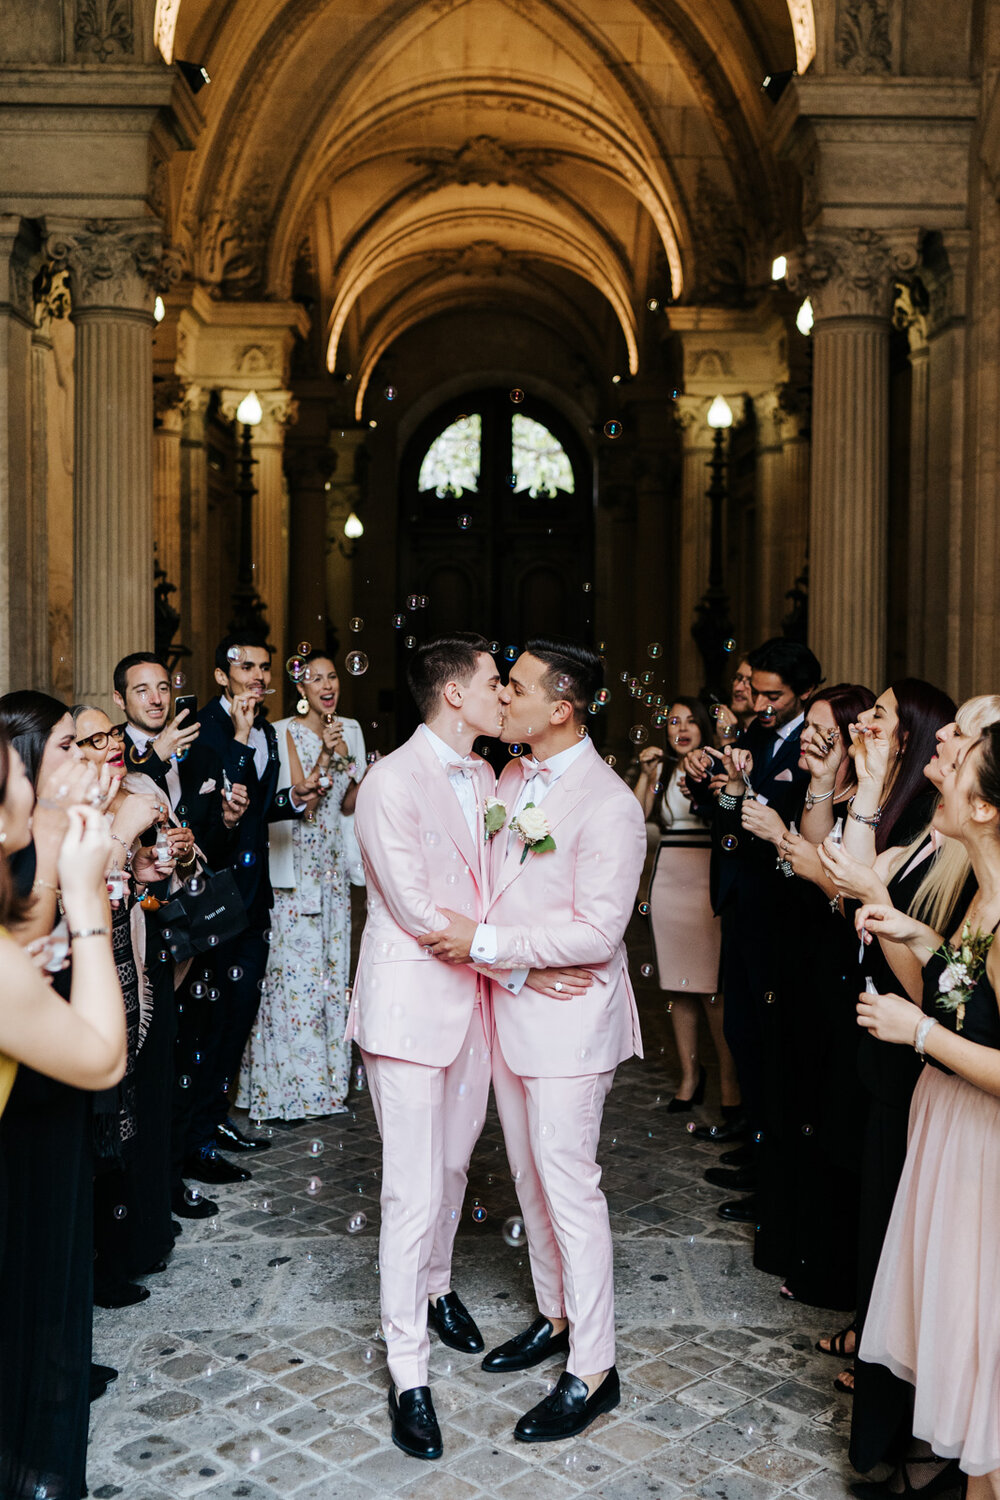  Both grooms kiss in the middle of a bubble tunnel at Paris same sex wedding while family and friends blow bubbles around them 